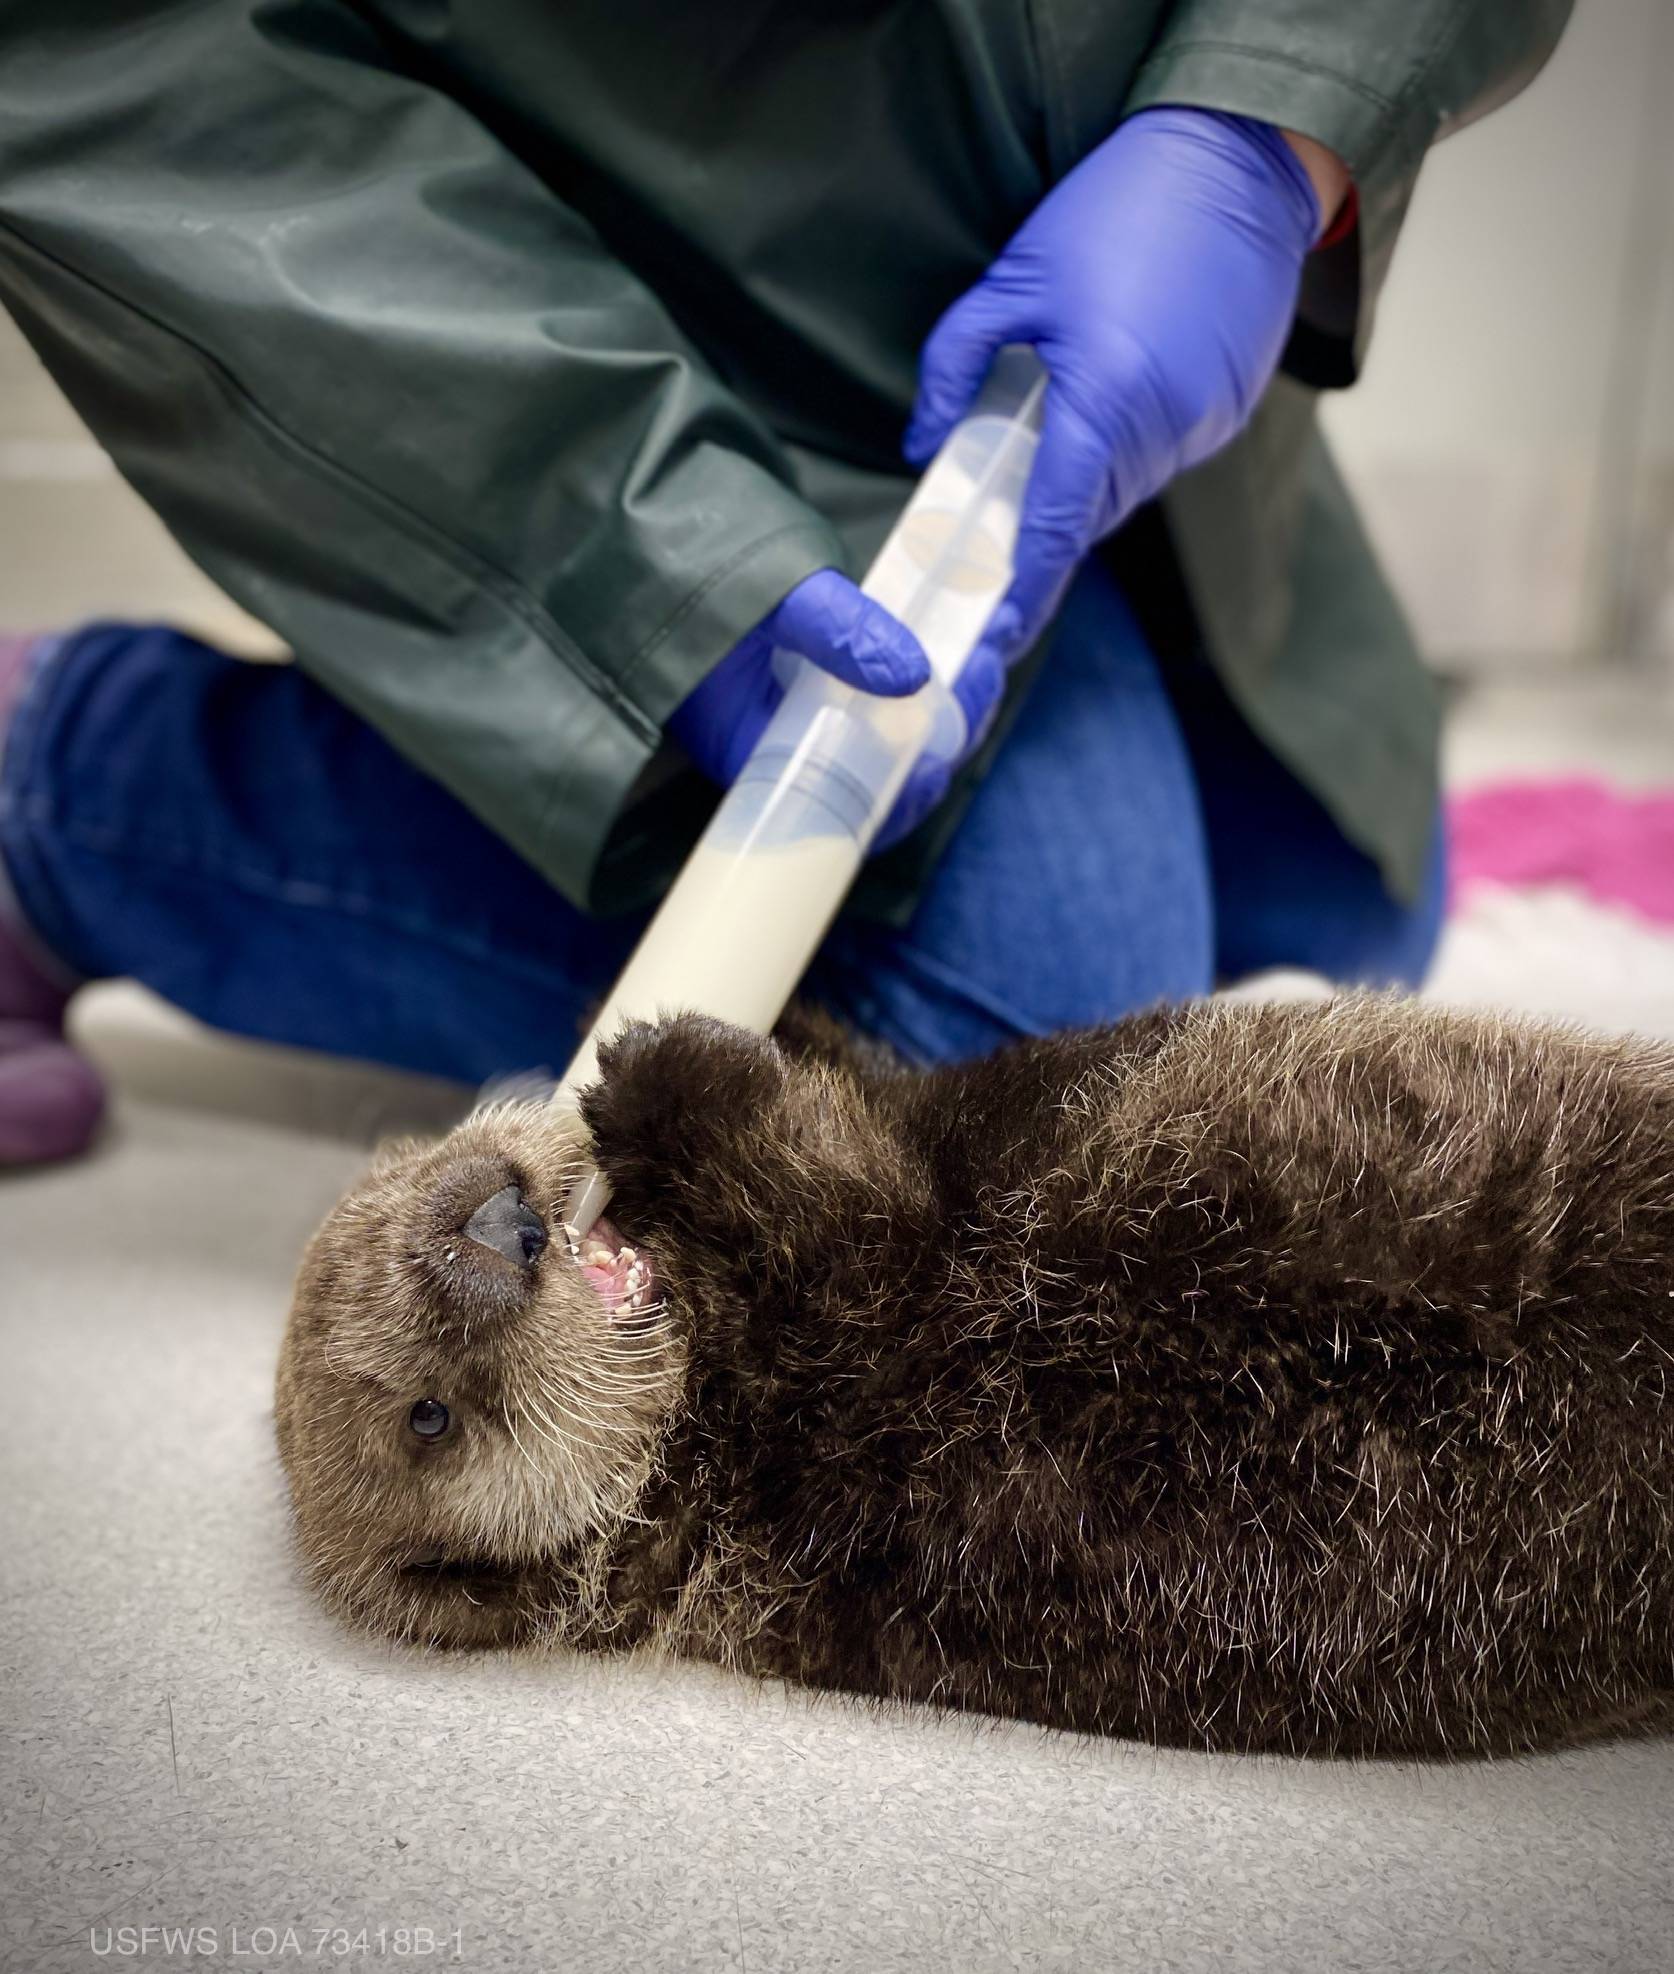 Photo courtesy Alaska SeaLife Center
Juniper, a female sea otter pup, is seen here being fed at the Alaska SeaLife Center in Seward in this undated photo.